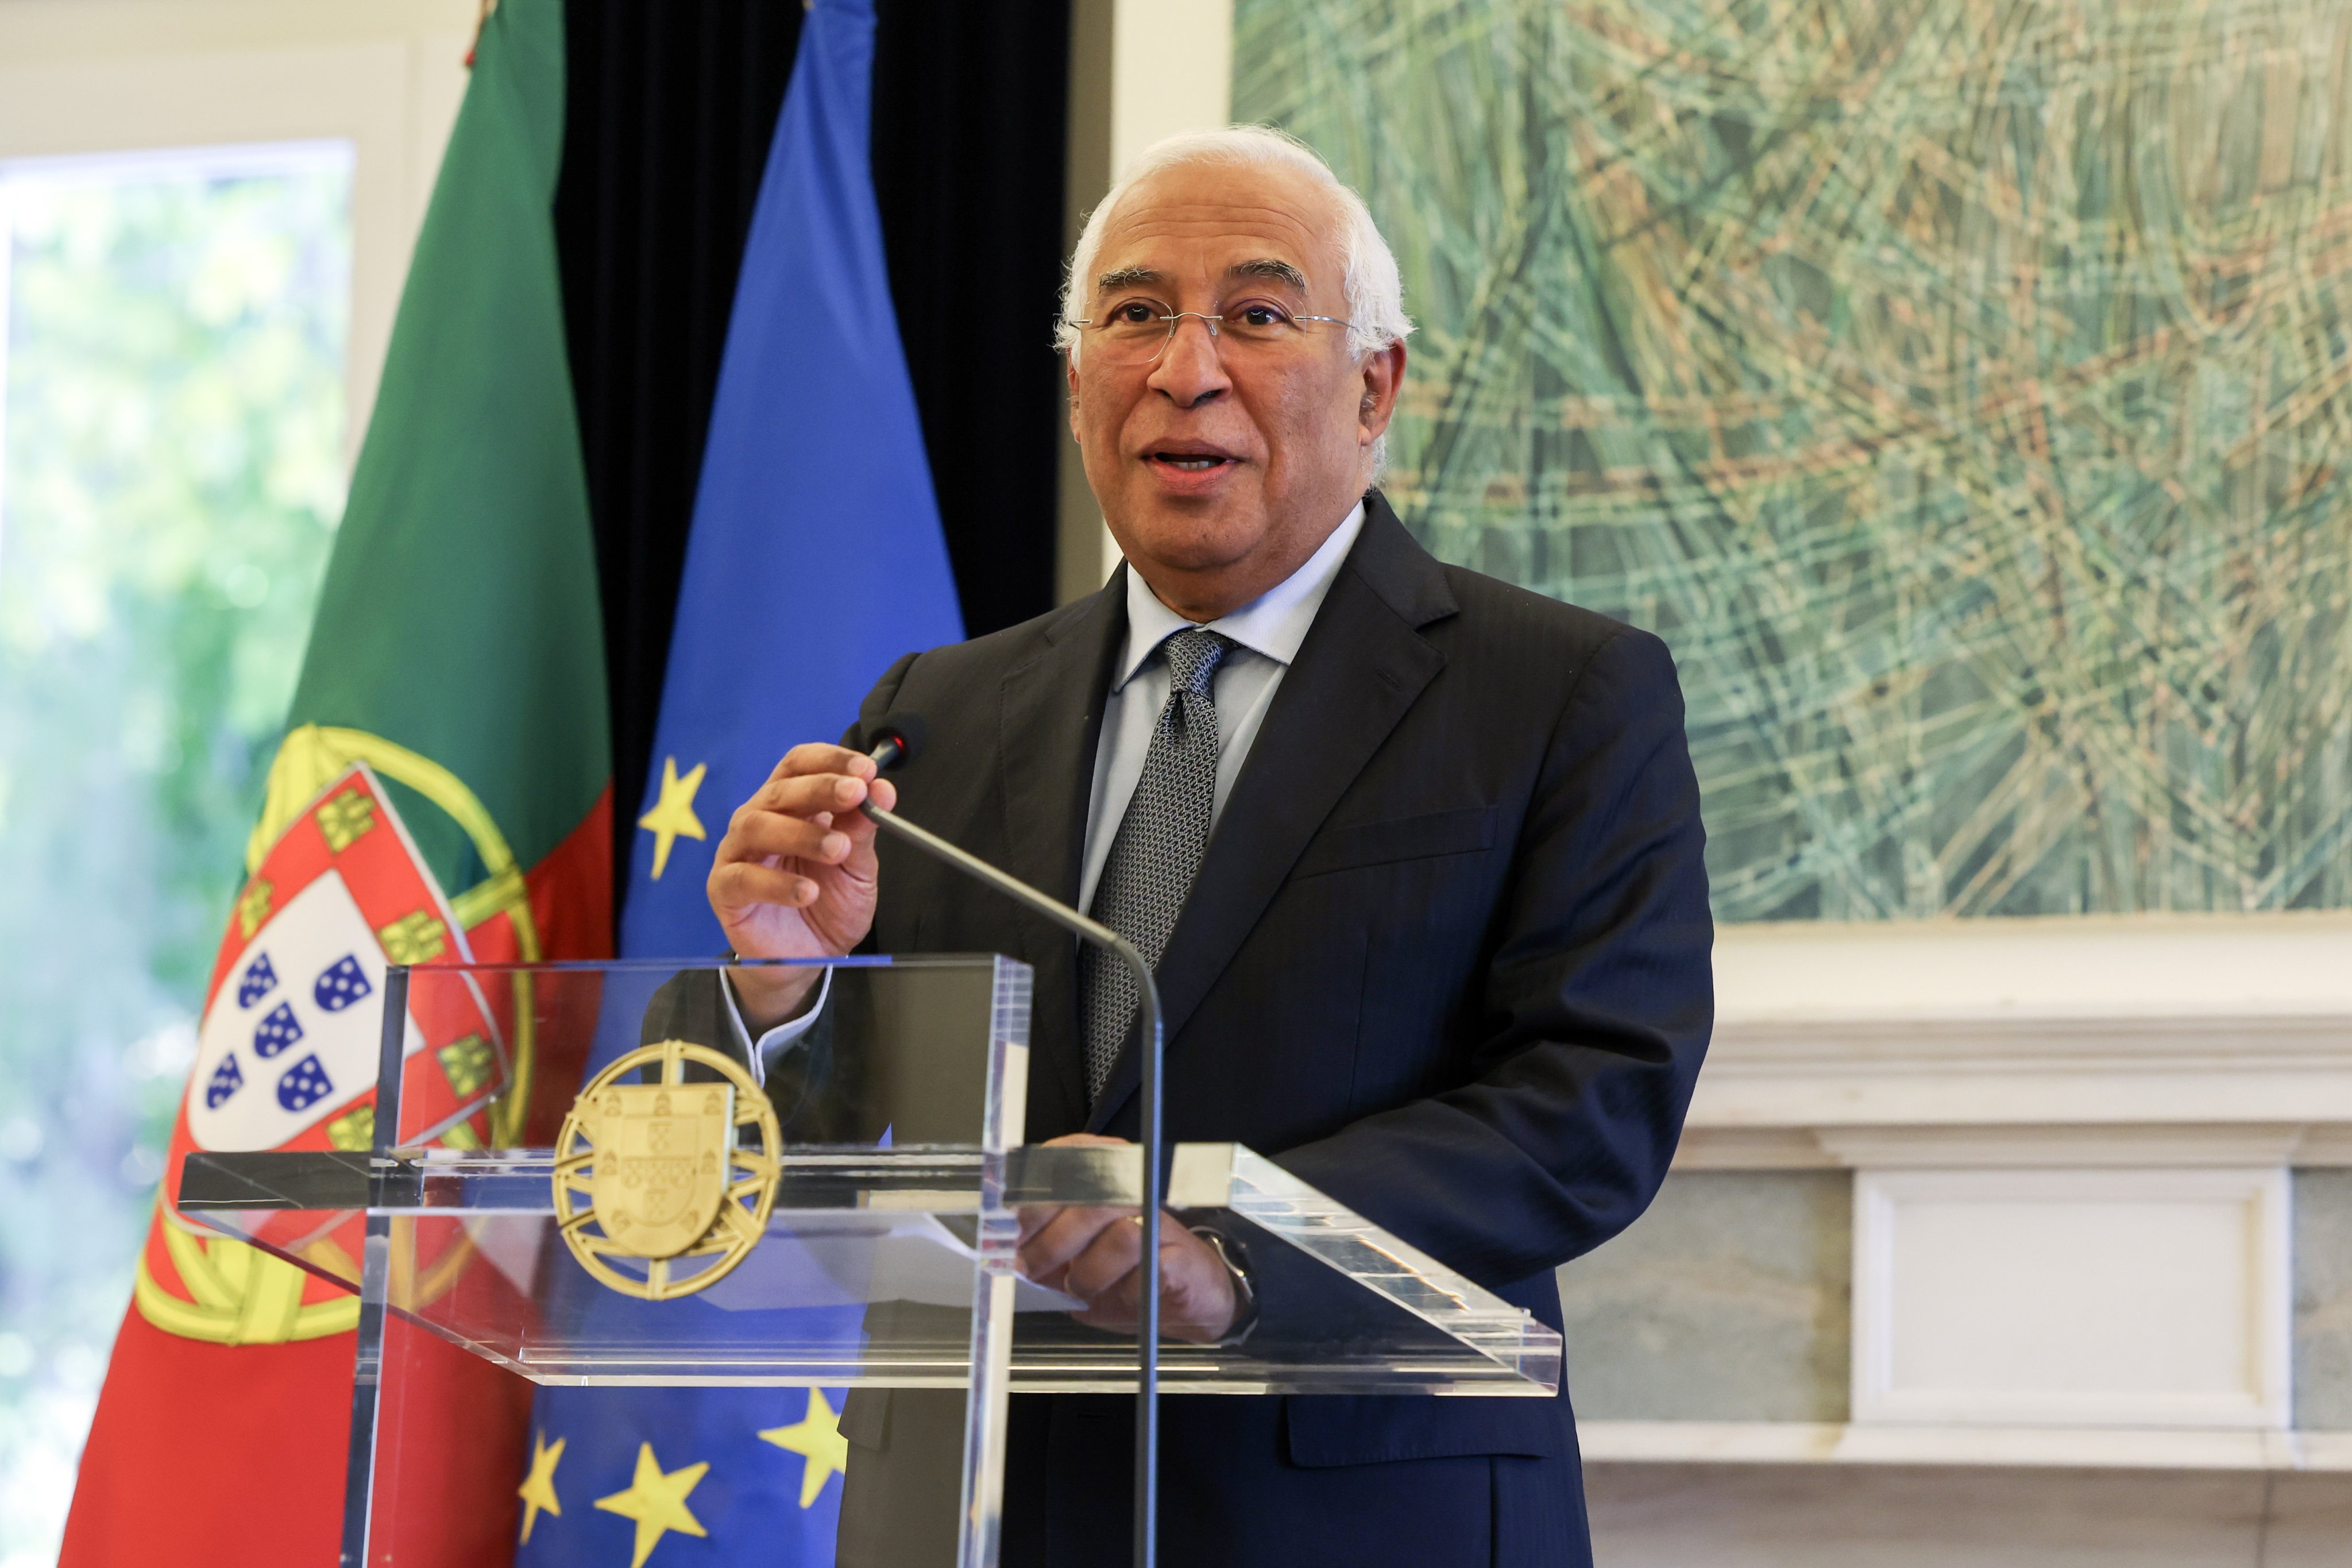 Portugal’s Prime Minister Antonio Costa leaves after addressing the nation to announce he has submitted his resignation letter to the president of the Republic at Sao Bento Palace in Lisbon on Tuesday. Photo: EPA-EFE